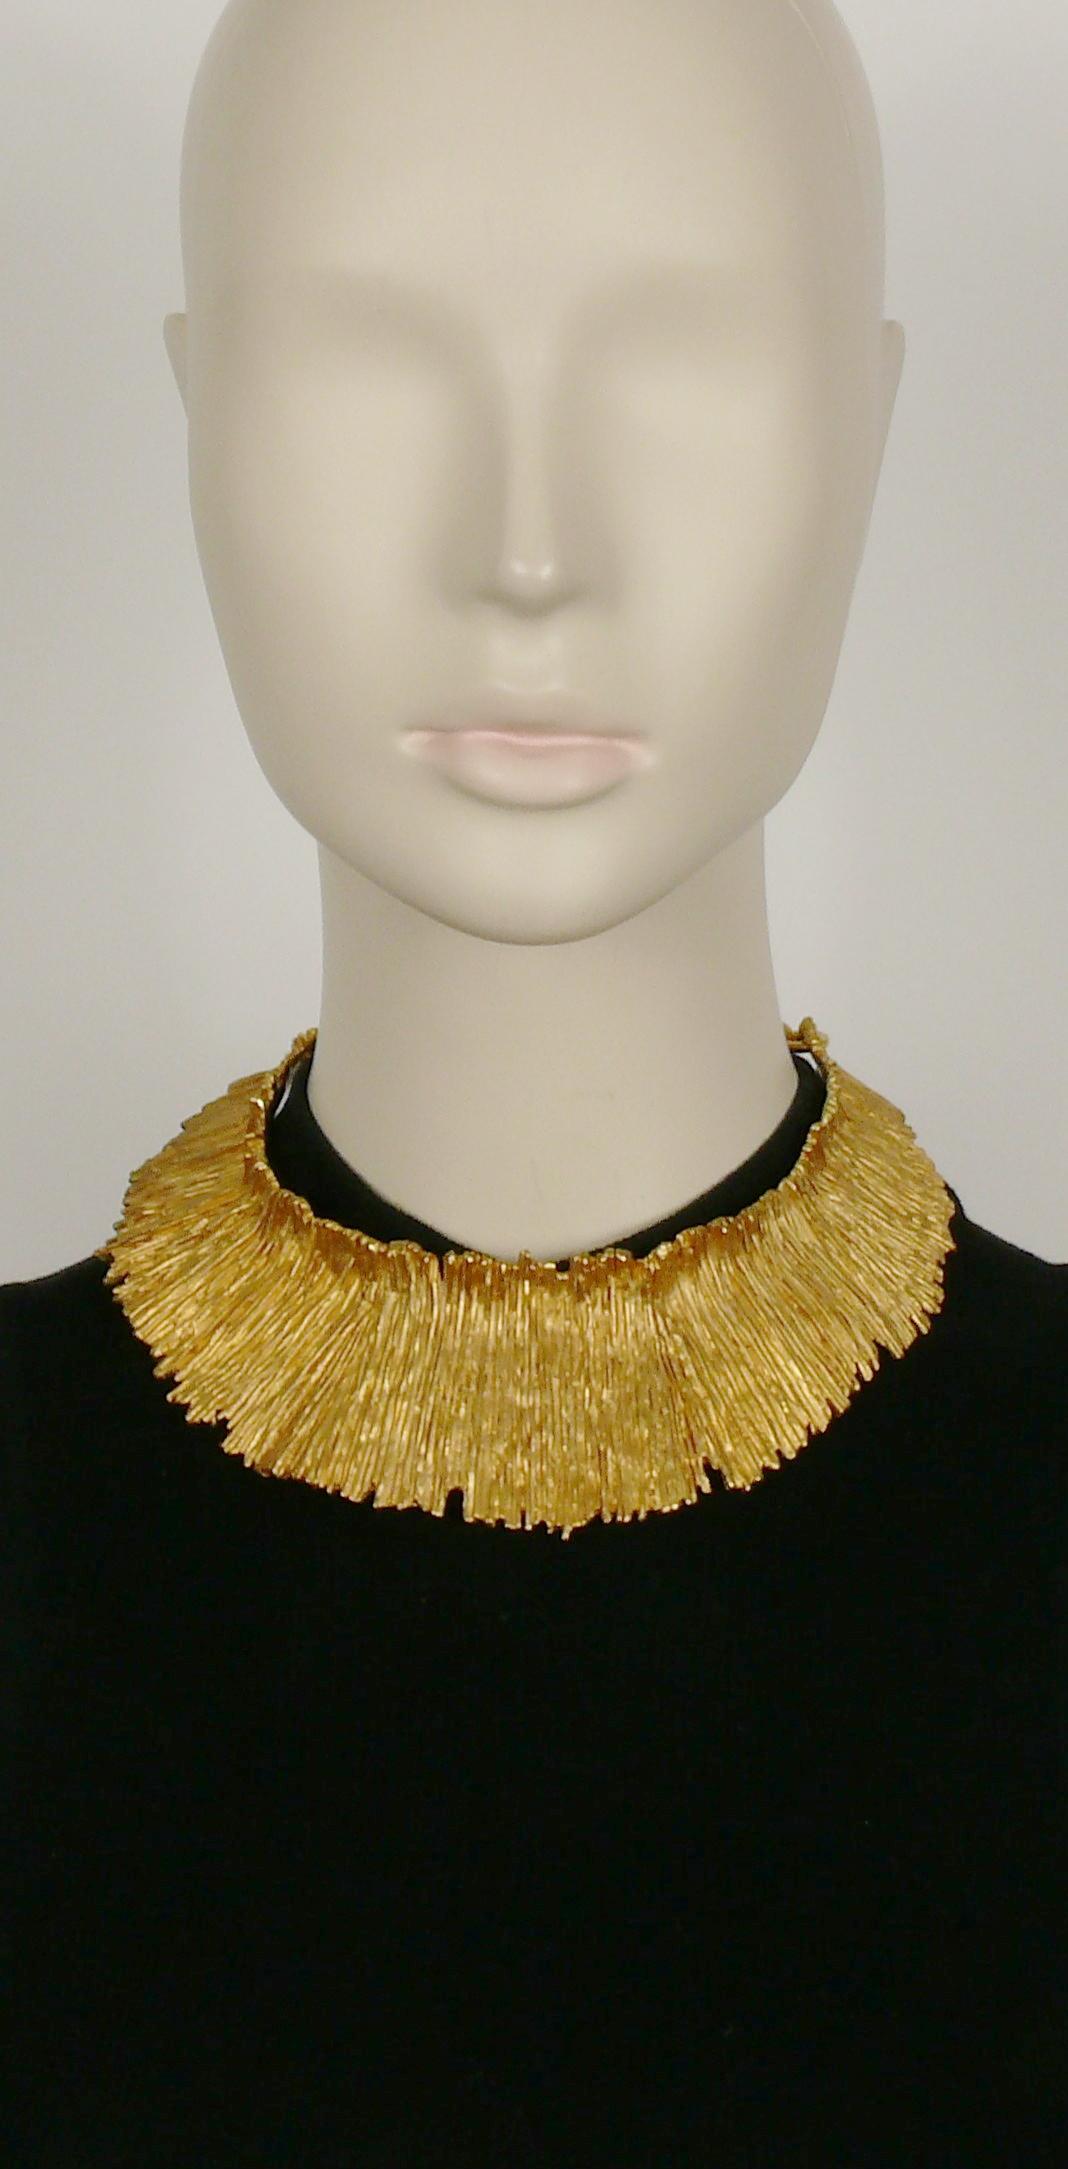 BICHE DE BERE Paris vintage gold toned brutalist collar necklace featuring a deeply ribbed radiant sun 3-dimensional effect design.

Chunky link chain for adjusting the collar around the neck.

Embossed BICHE DE BERE Paris.

Indicative measurements